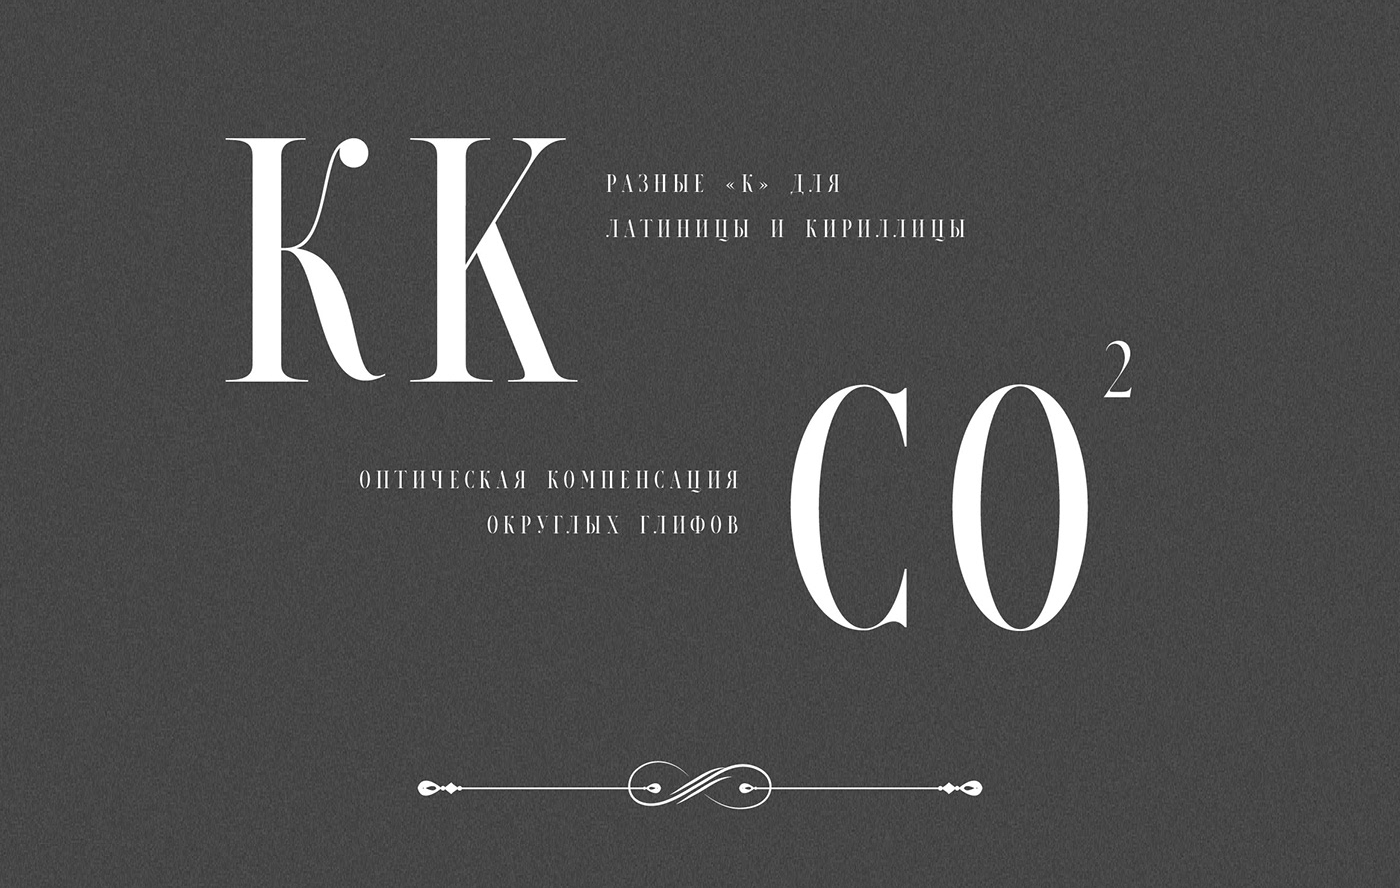 Font Petrogradski: download and install on the WEB site